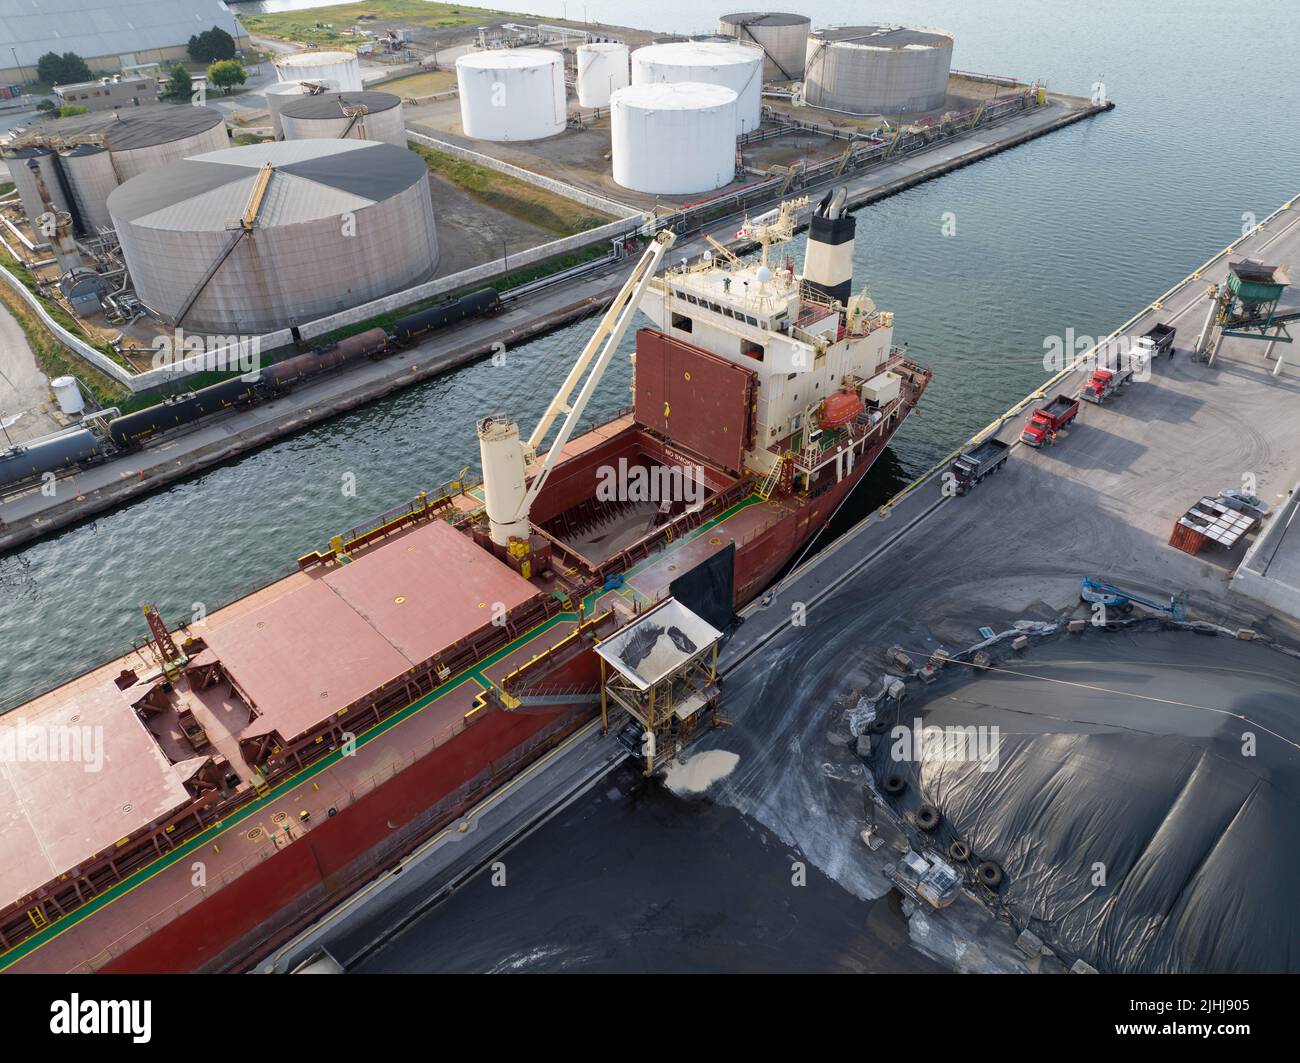 A bulk carrier cargo ship is seen at port offloading dry goods by crane, filling numerous dump trucks during the day. Stock Photo